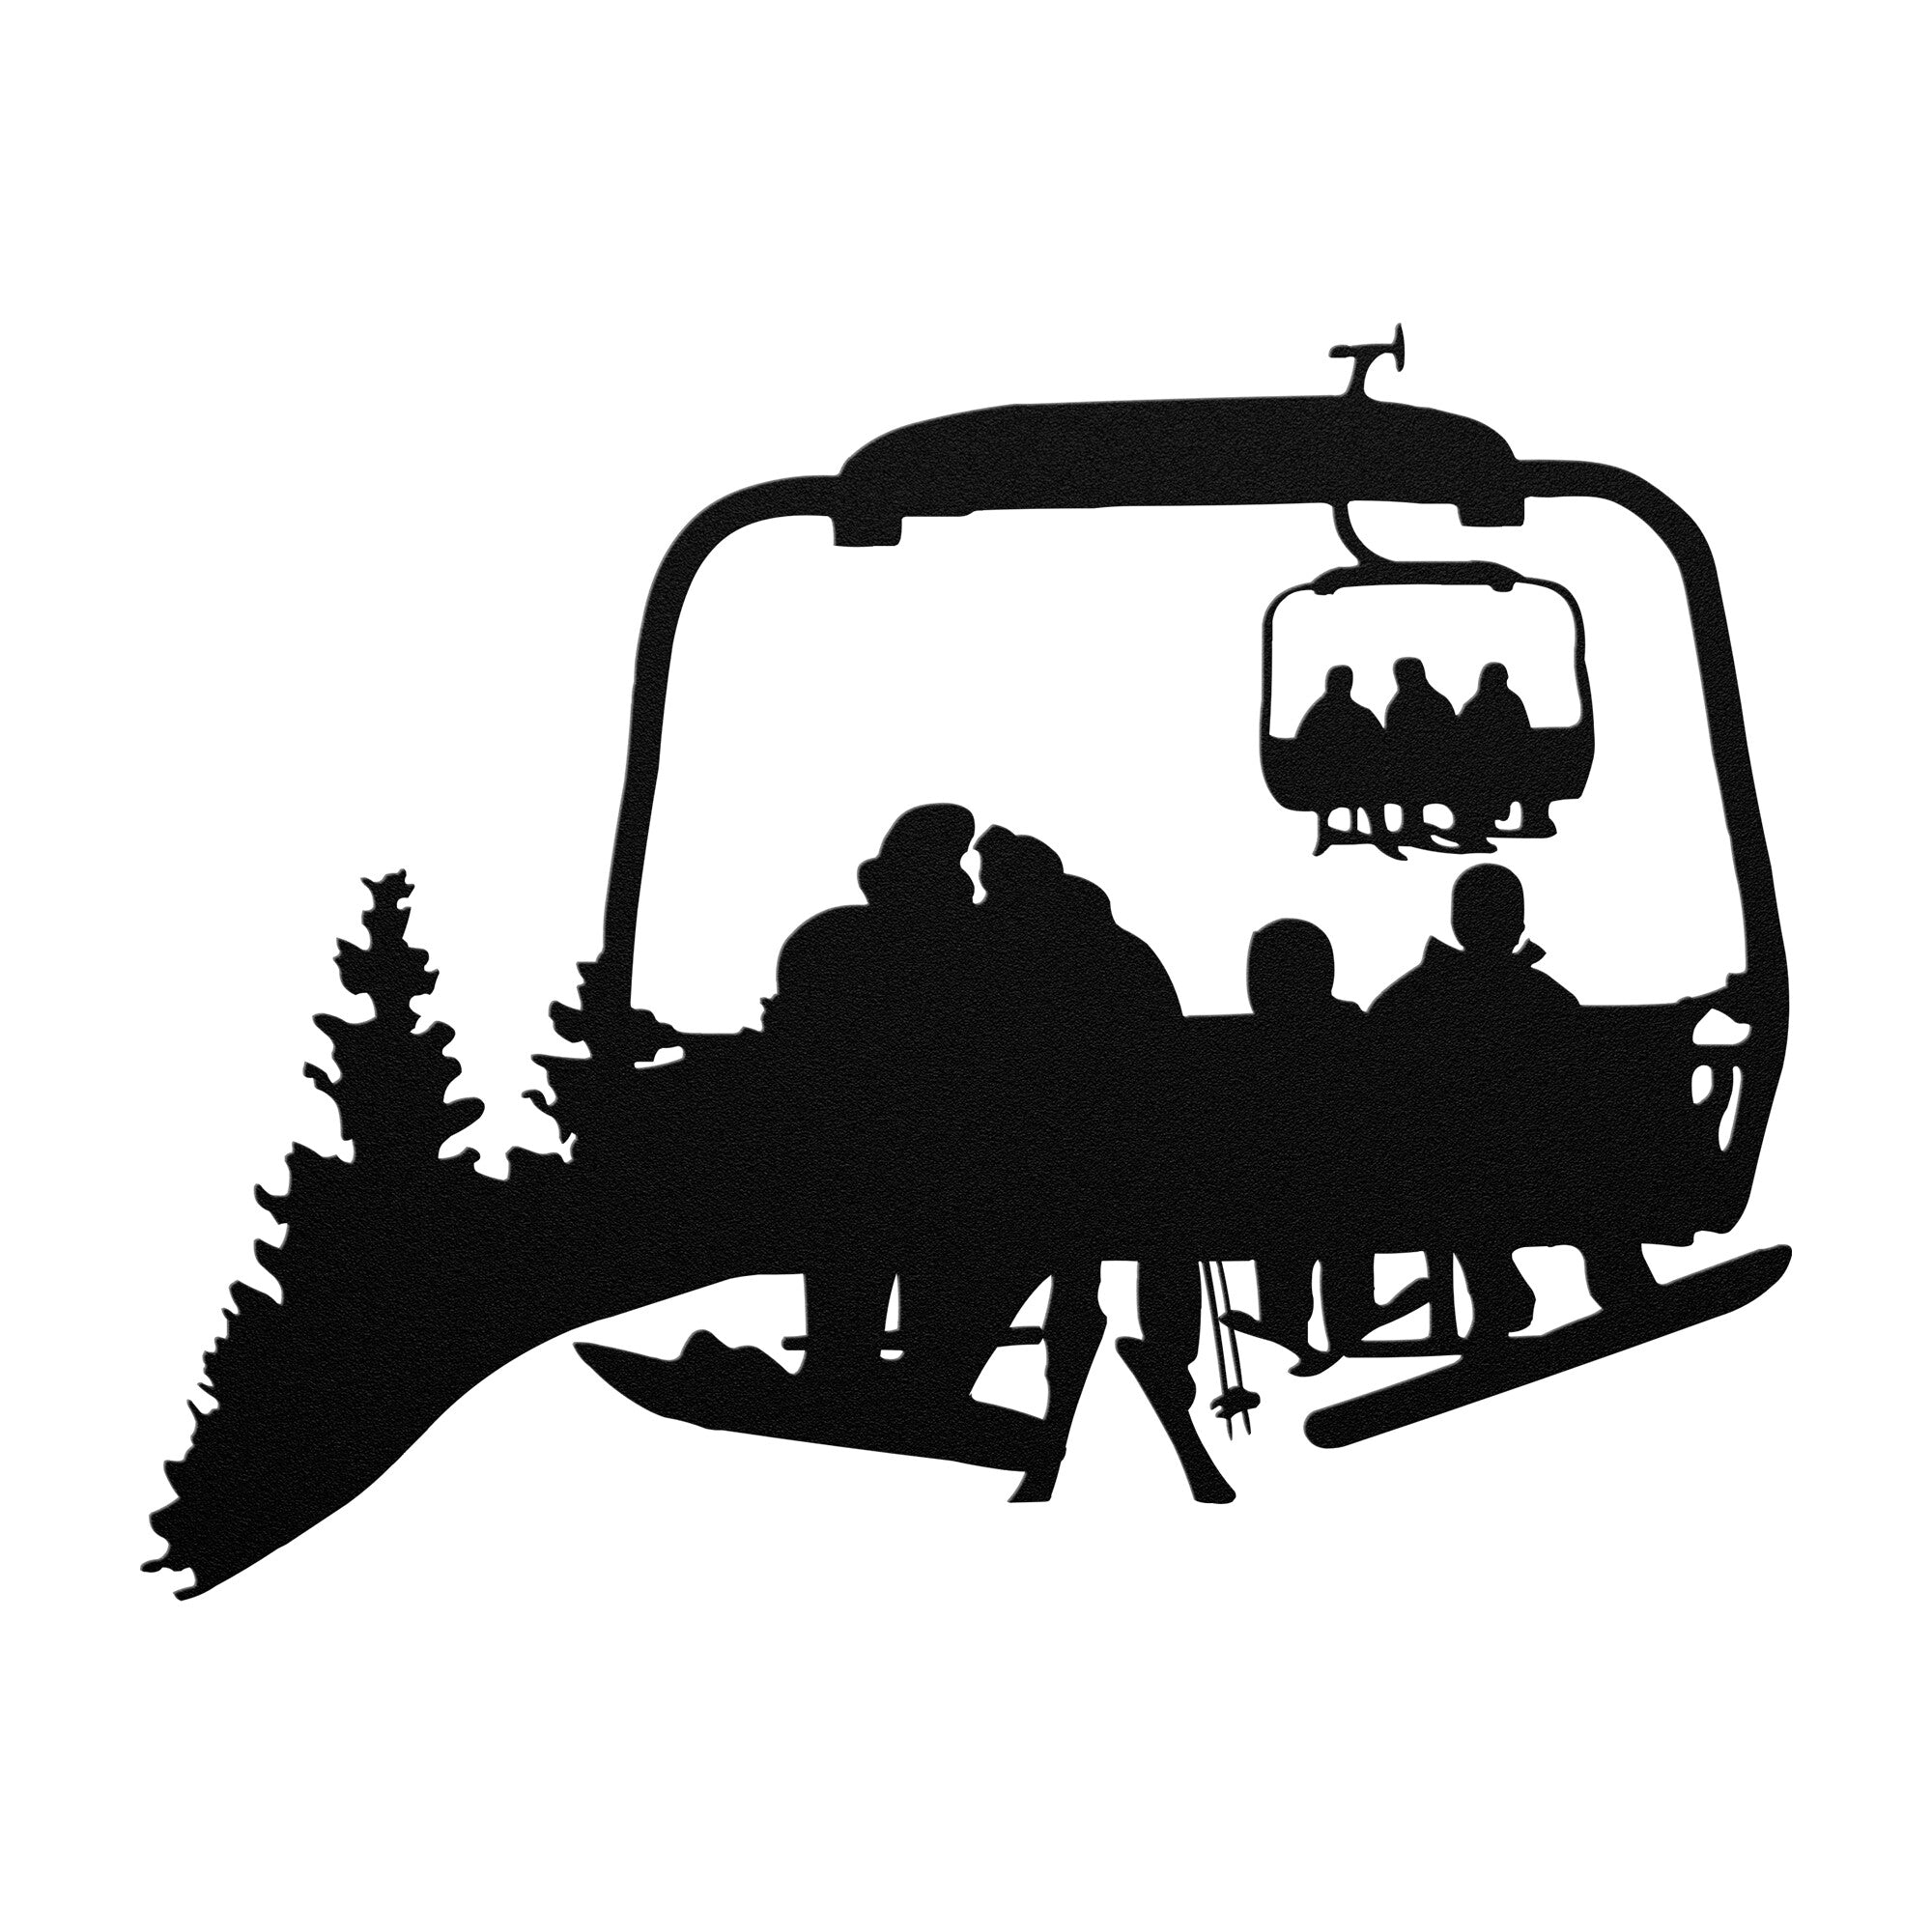 PERSONALIZED CHAIRLIFT SKI & SNOWBOARD FAMILY METAL WALL ART, 1 SNOWBOARDING DAD, 1 SKIING MOM, 1 SNOWBOARDING CHILD, 1 SKIING CHILD  (🇺🇸 MADE IN THE USA)